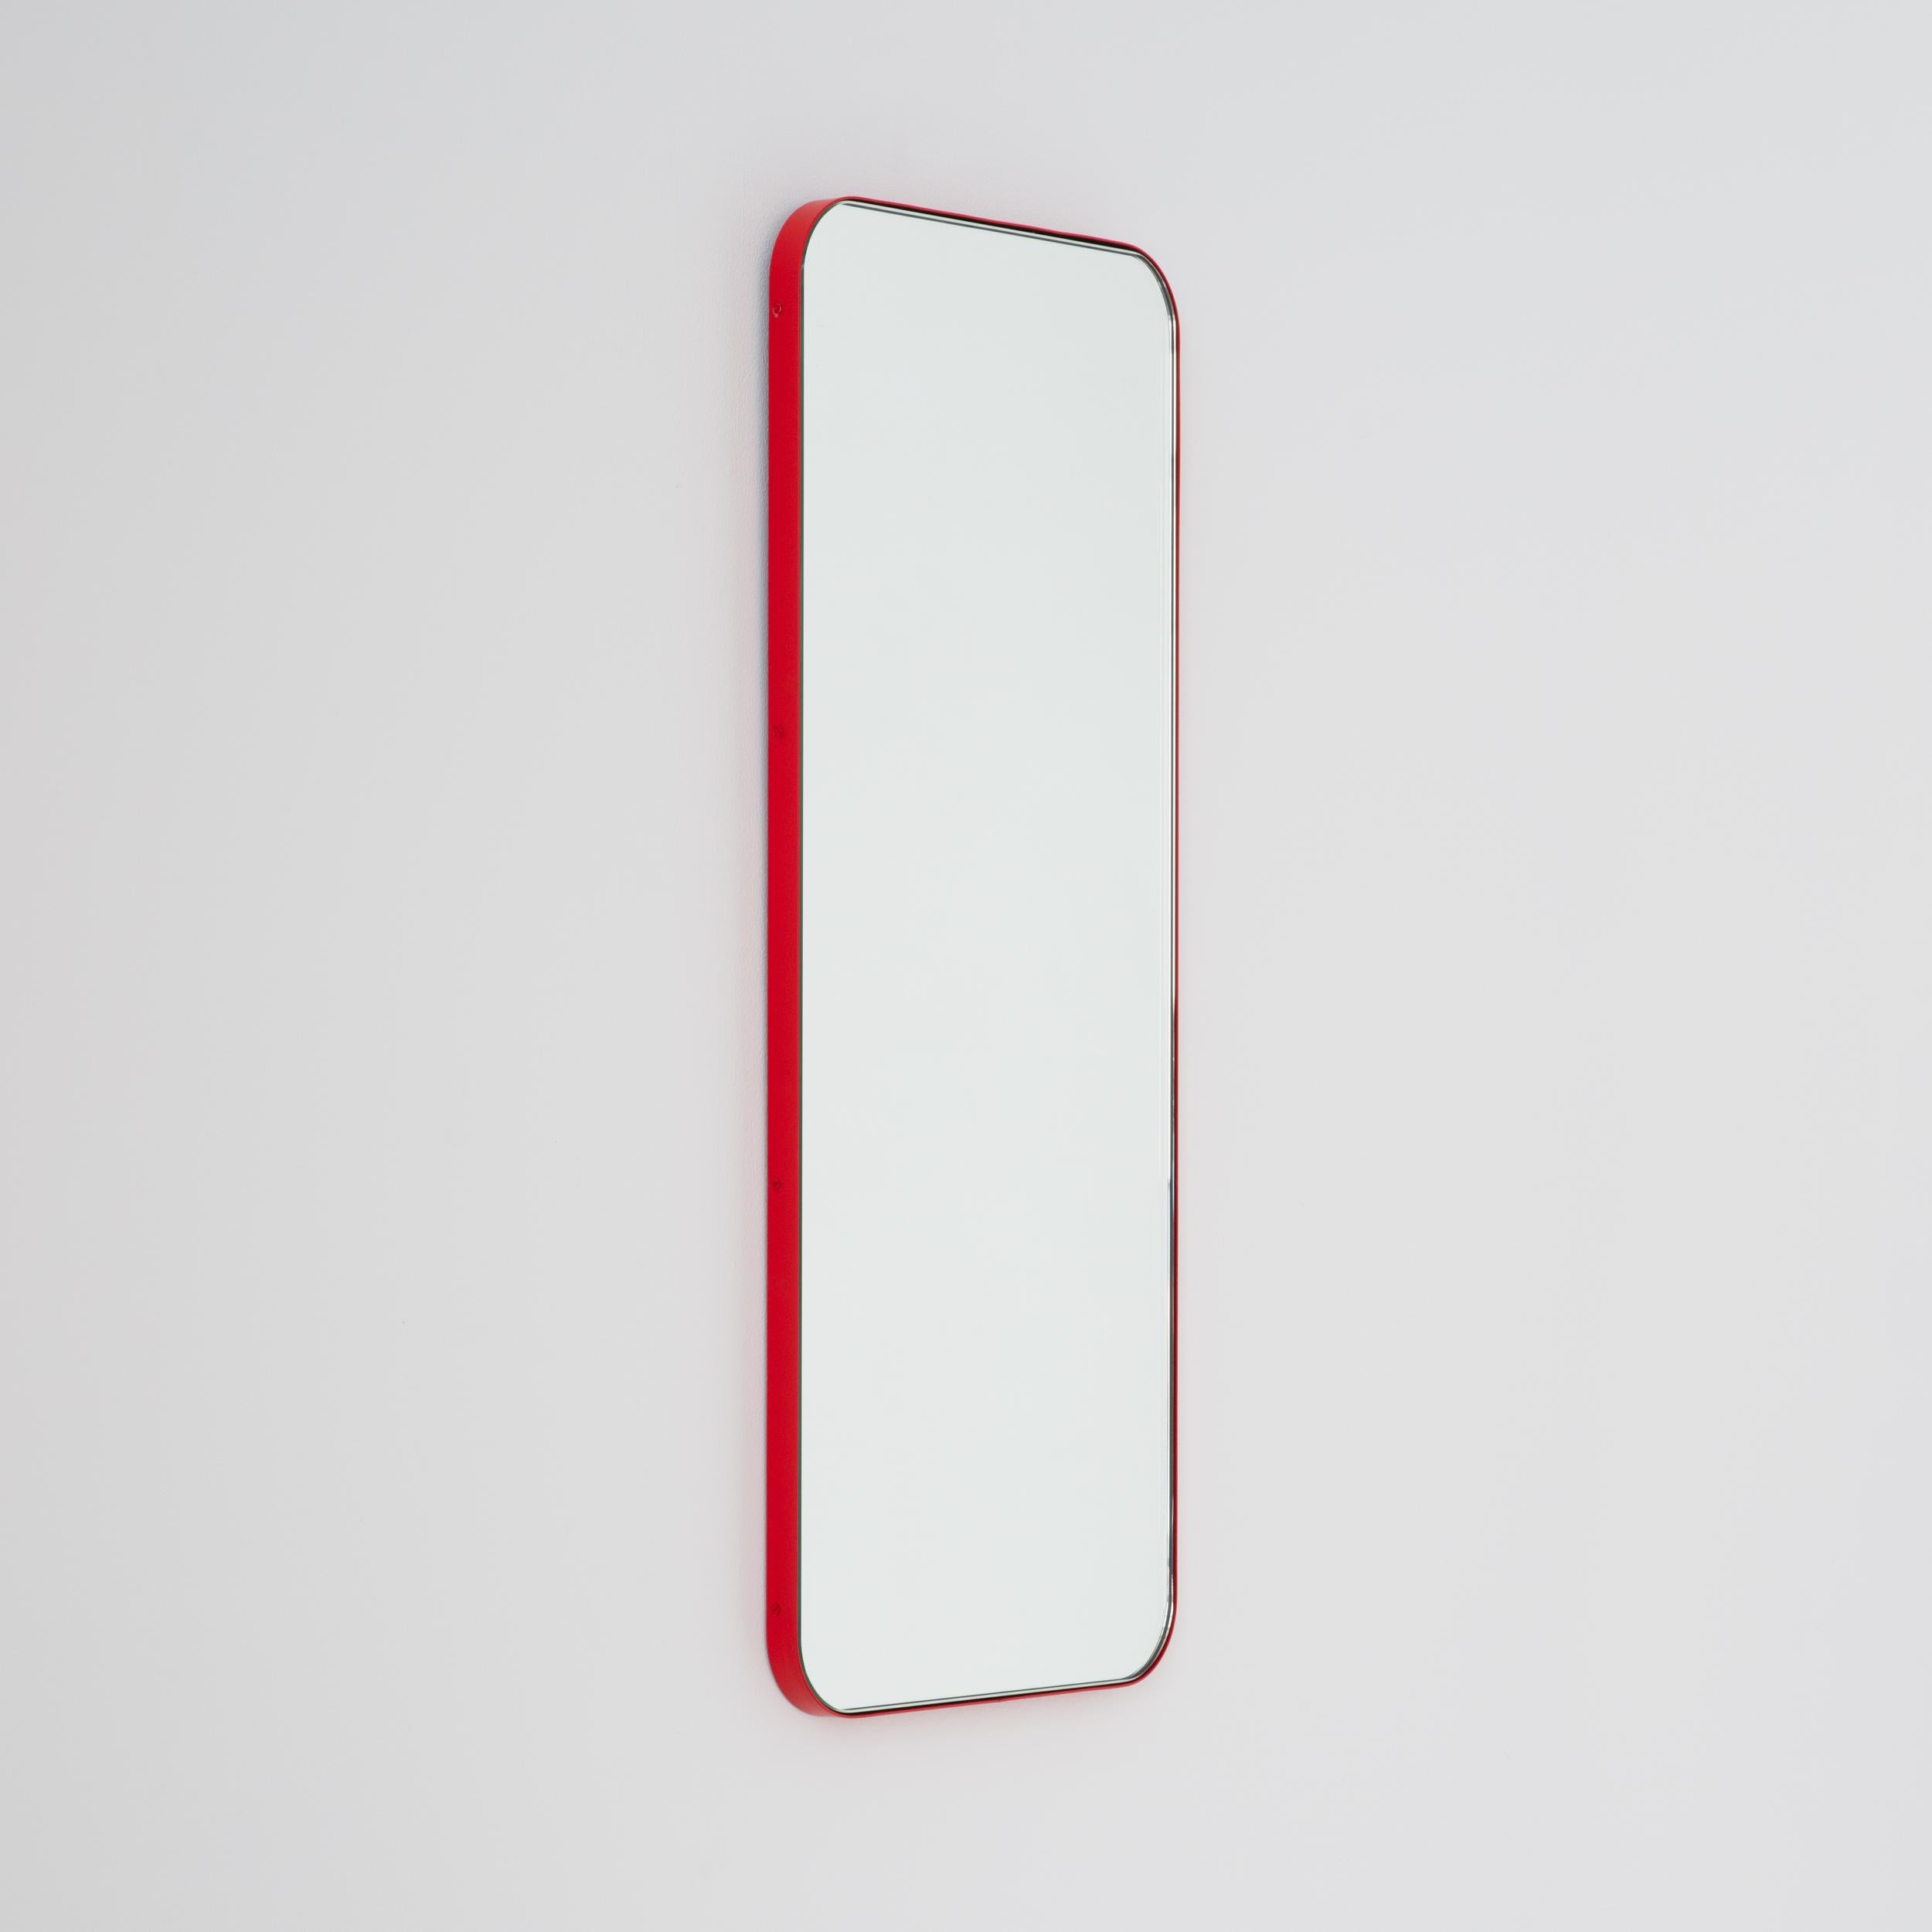 British Quadris Rectangular Minimalist Mirror with a Red Frame, Small For Sale